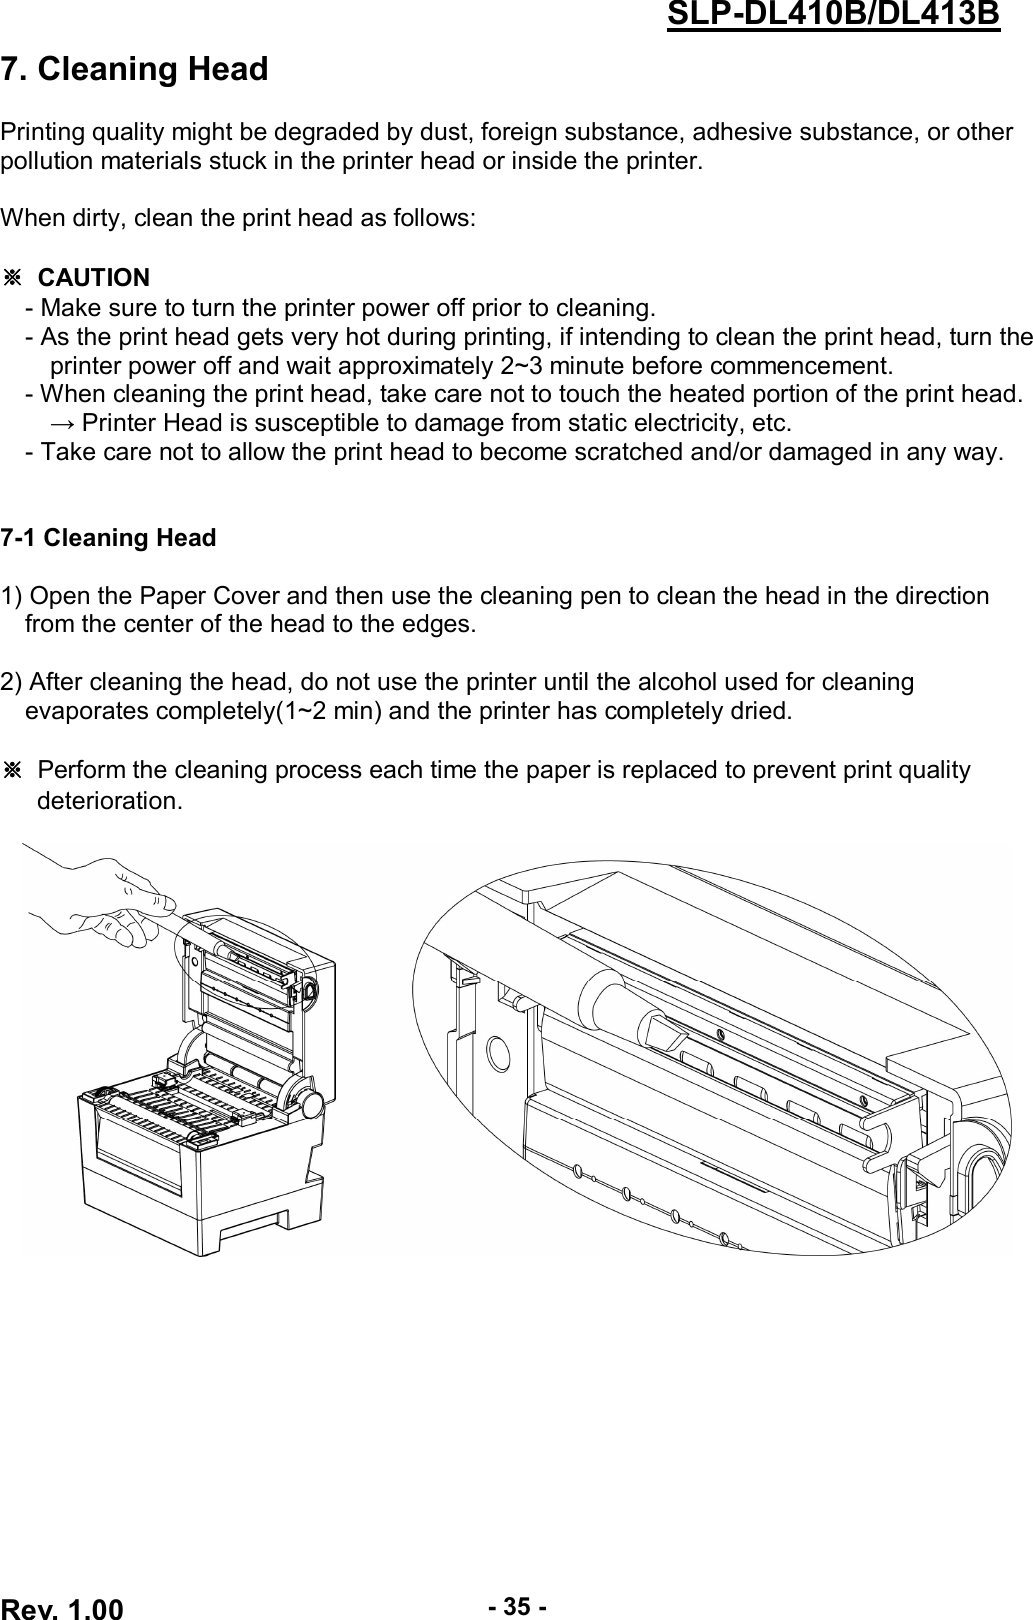  Rev. 1.00 - 35 - SLP-DL410B/DL413B 7. Cleaning Head  Printing quality might be degraded by dust, foreign substance, adhesive substance, or other pollution materials stuck in the printer head or inside the printer.    When dirty, clean the print head as follows:  ※  CAUTION - Make sure to turn the printer power off prior to cleaning. - As the print head gets very hot during printing, if intending to clean the print head, turn the printer power off and wait approximately 2~3 minute before commencement. - When cleaning the print head, take care not to touch the heated portion of the print head.         → Printer Head is susceptible to damage from static electricity, etc. - Take care not to allow the print head to become scratched and/or damaged in any way.   7-1 Cleaning Head  1) Open the Paper Cover and then use the cleaning pen to clean the head in the direction       from the center of the head to the edges.  2) After cleaning the head, do not use the printer until the alcohol used for cleaning       evaporates completely(1~2 min) and the printer has completely dried.  ※ Perform the cleaning process each time the paper is replaced to prevent print quality deterioration.   